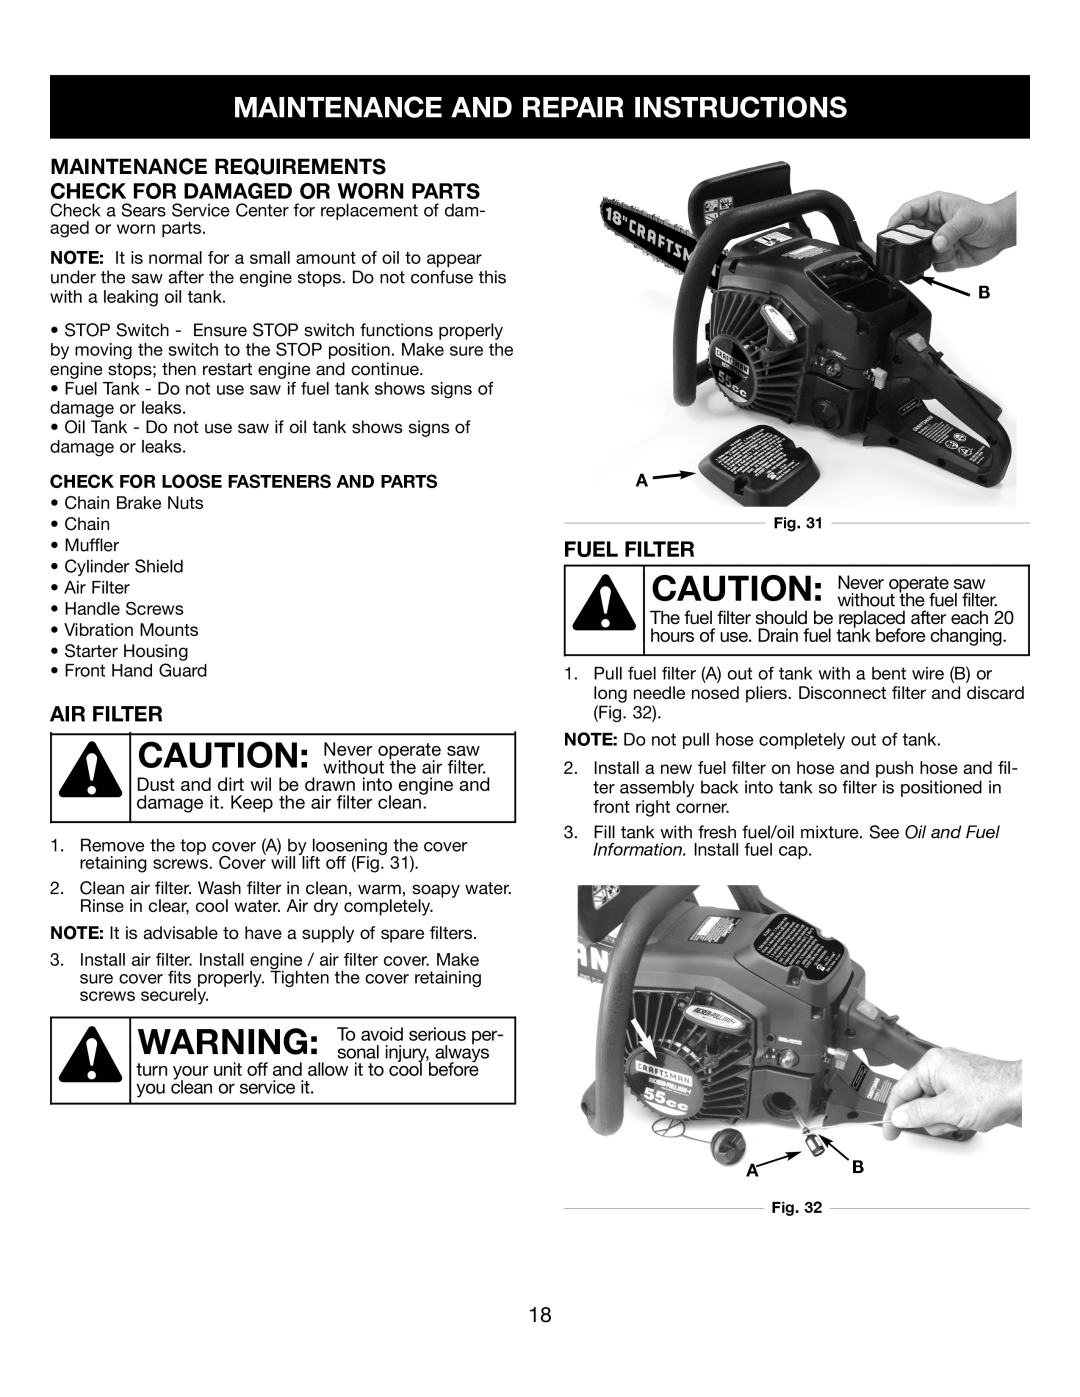 Craftsman 316350840 manual Maintenance And Repair Instructions, Maintenance Requirements, Check For Damaged Or Worn Parts 